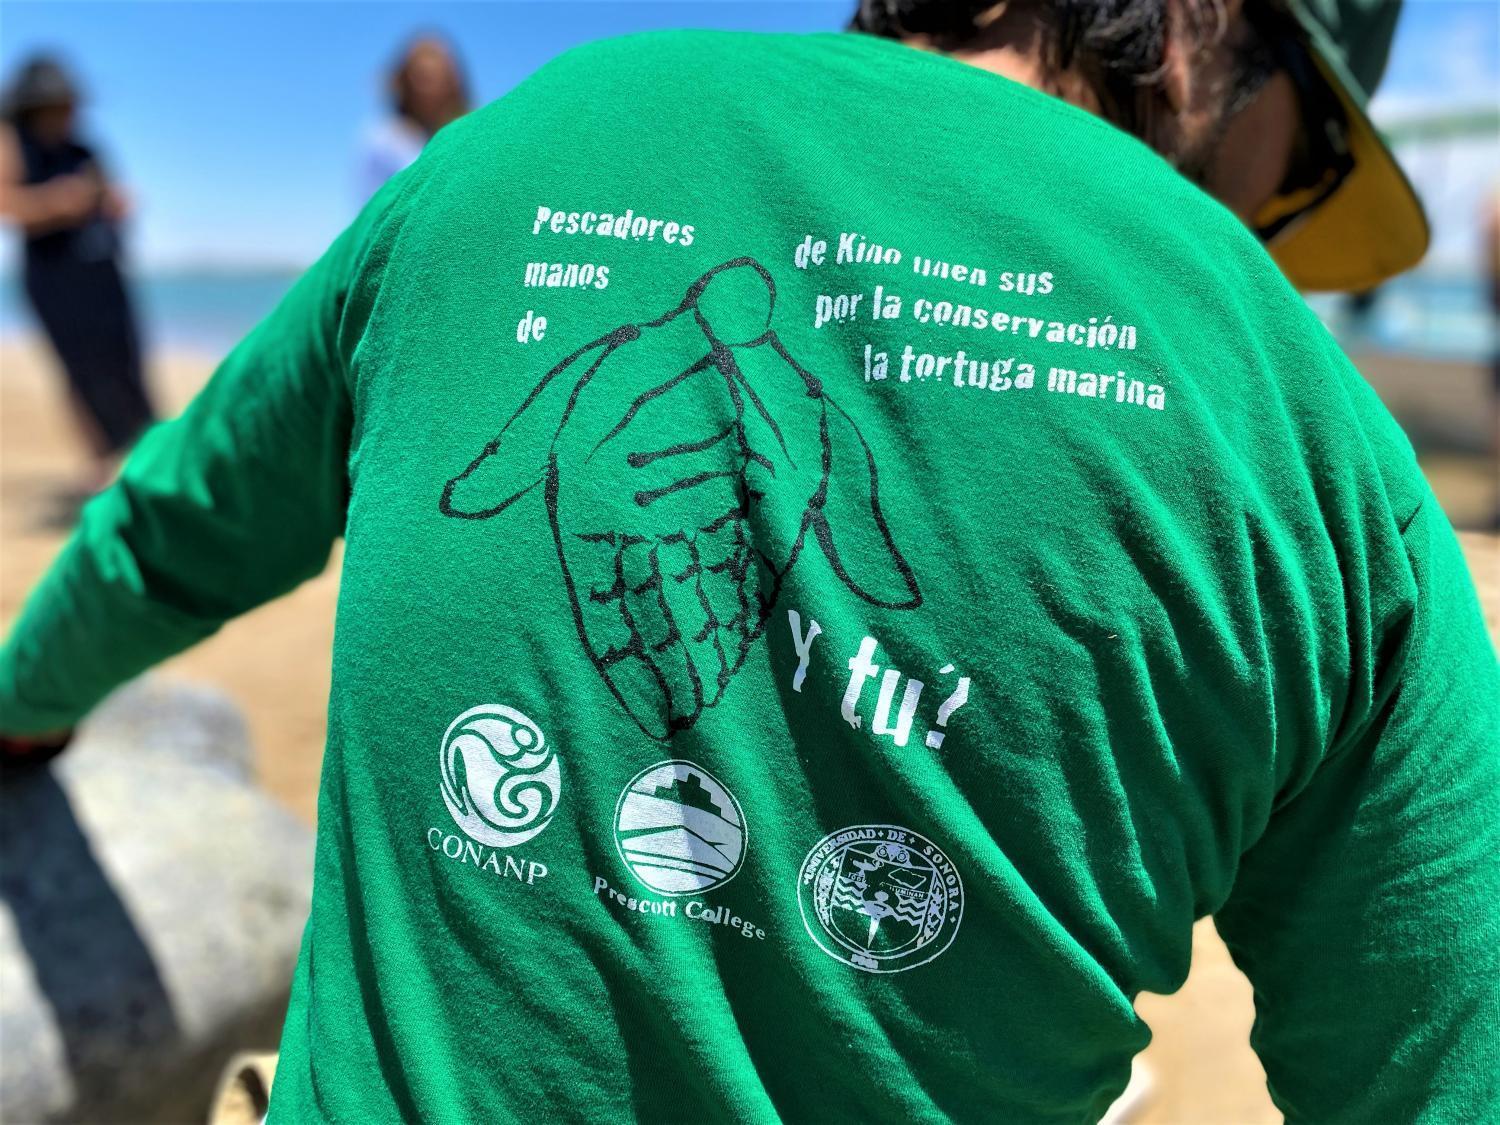 Cosme Becerra, like all of the Kino Bay tortugueros, wears a shirt that describes their conservation work.